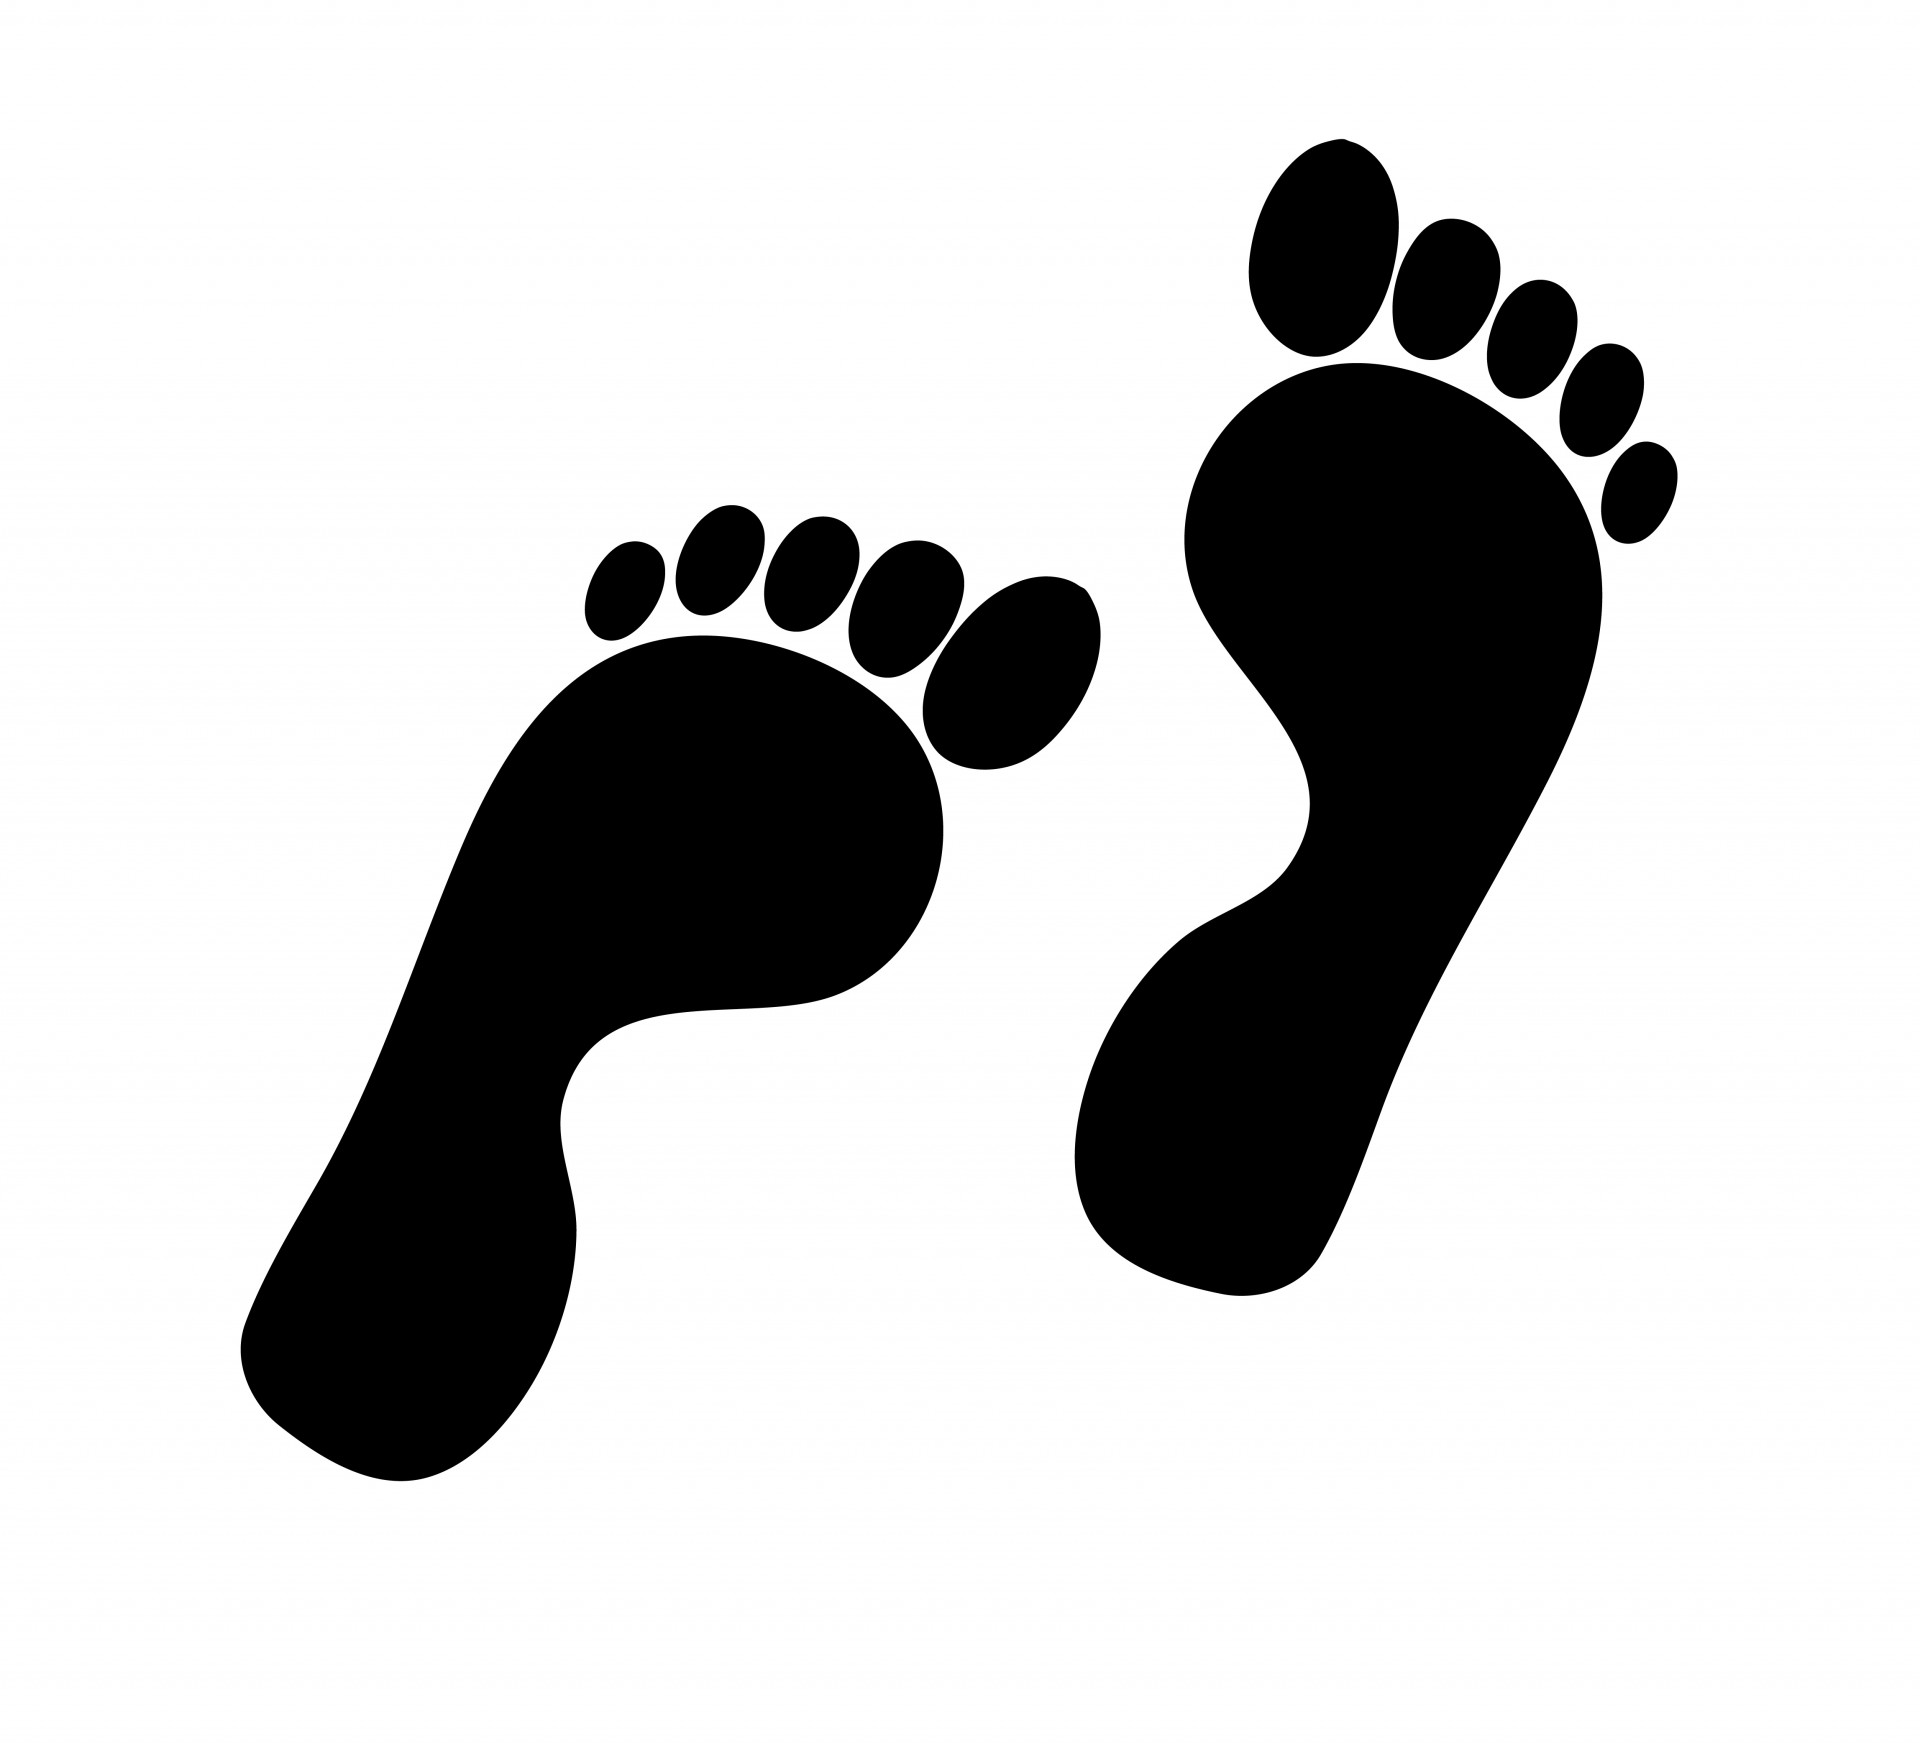 Footprints Silhouette Clipart - Footsteps Clipart